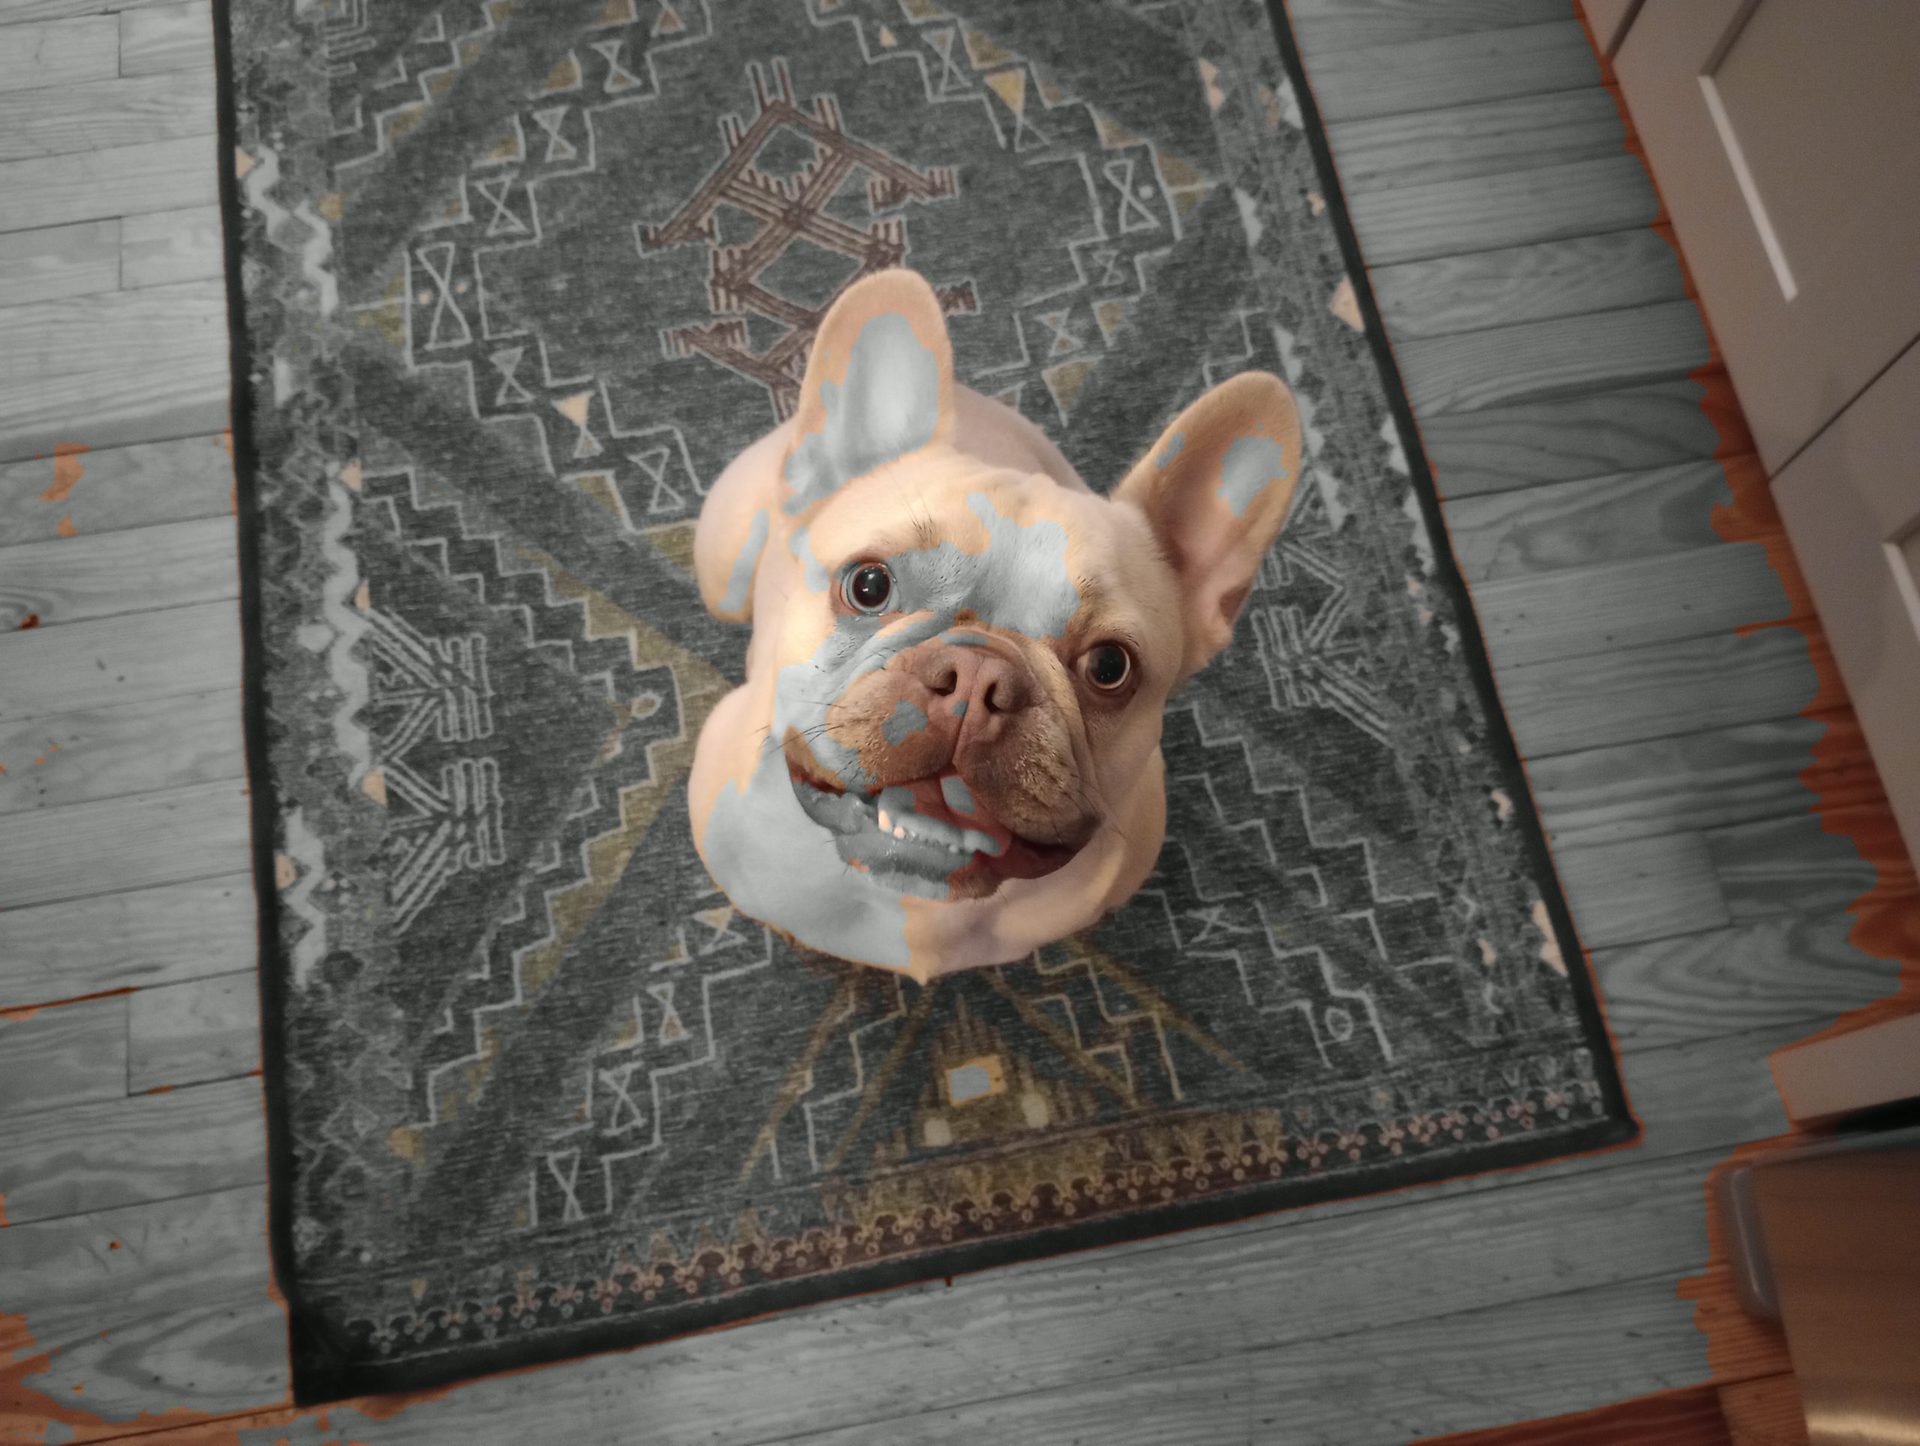 Moto G Stylus color picker shot of a dog on a rug, looking up at the camera